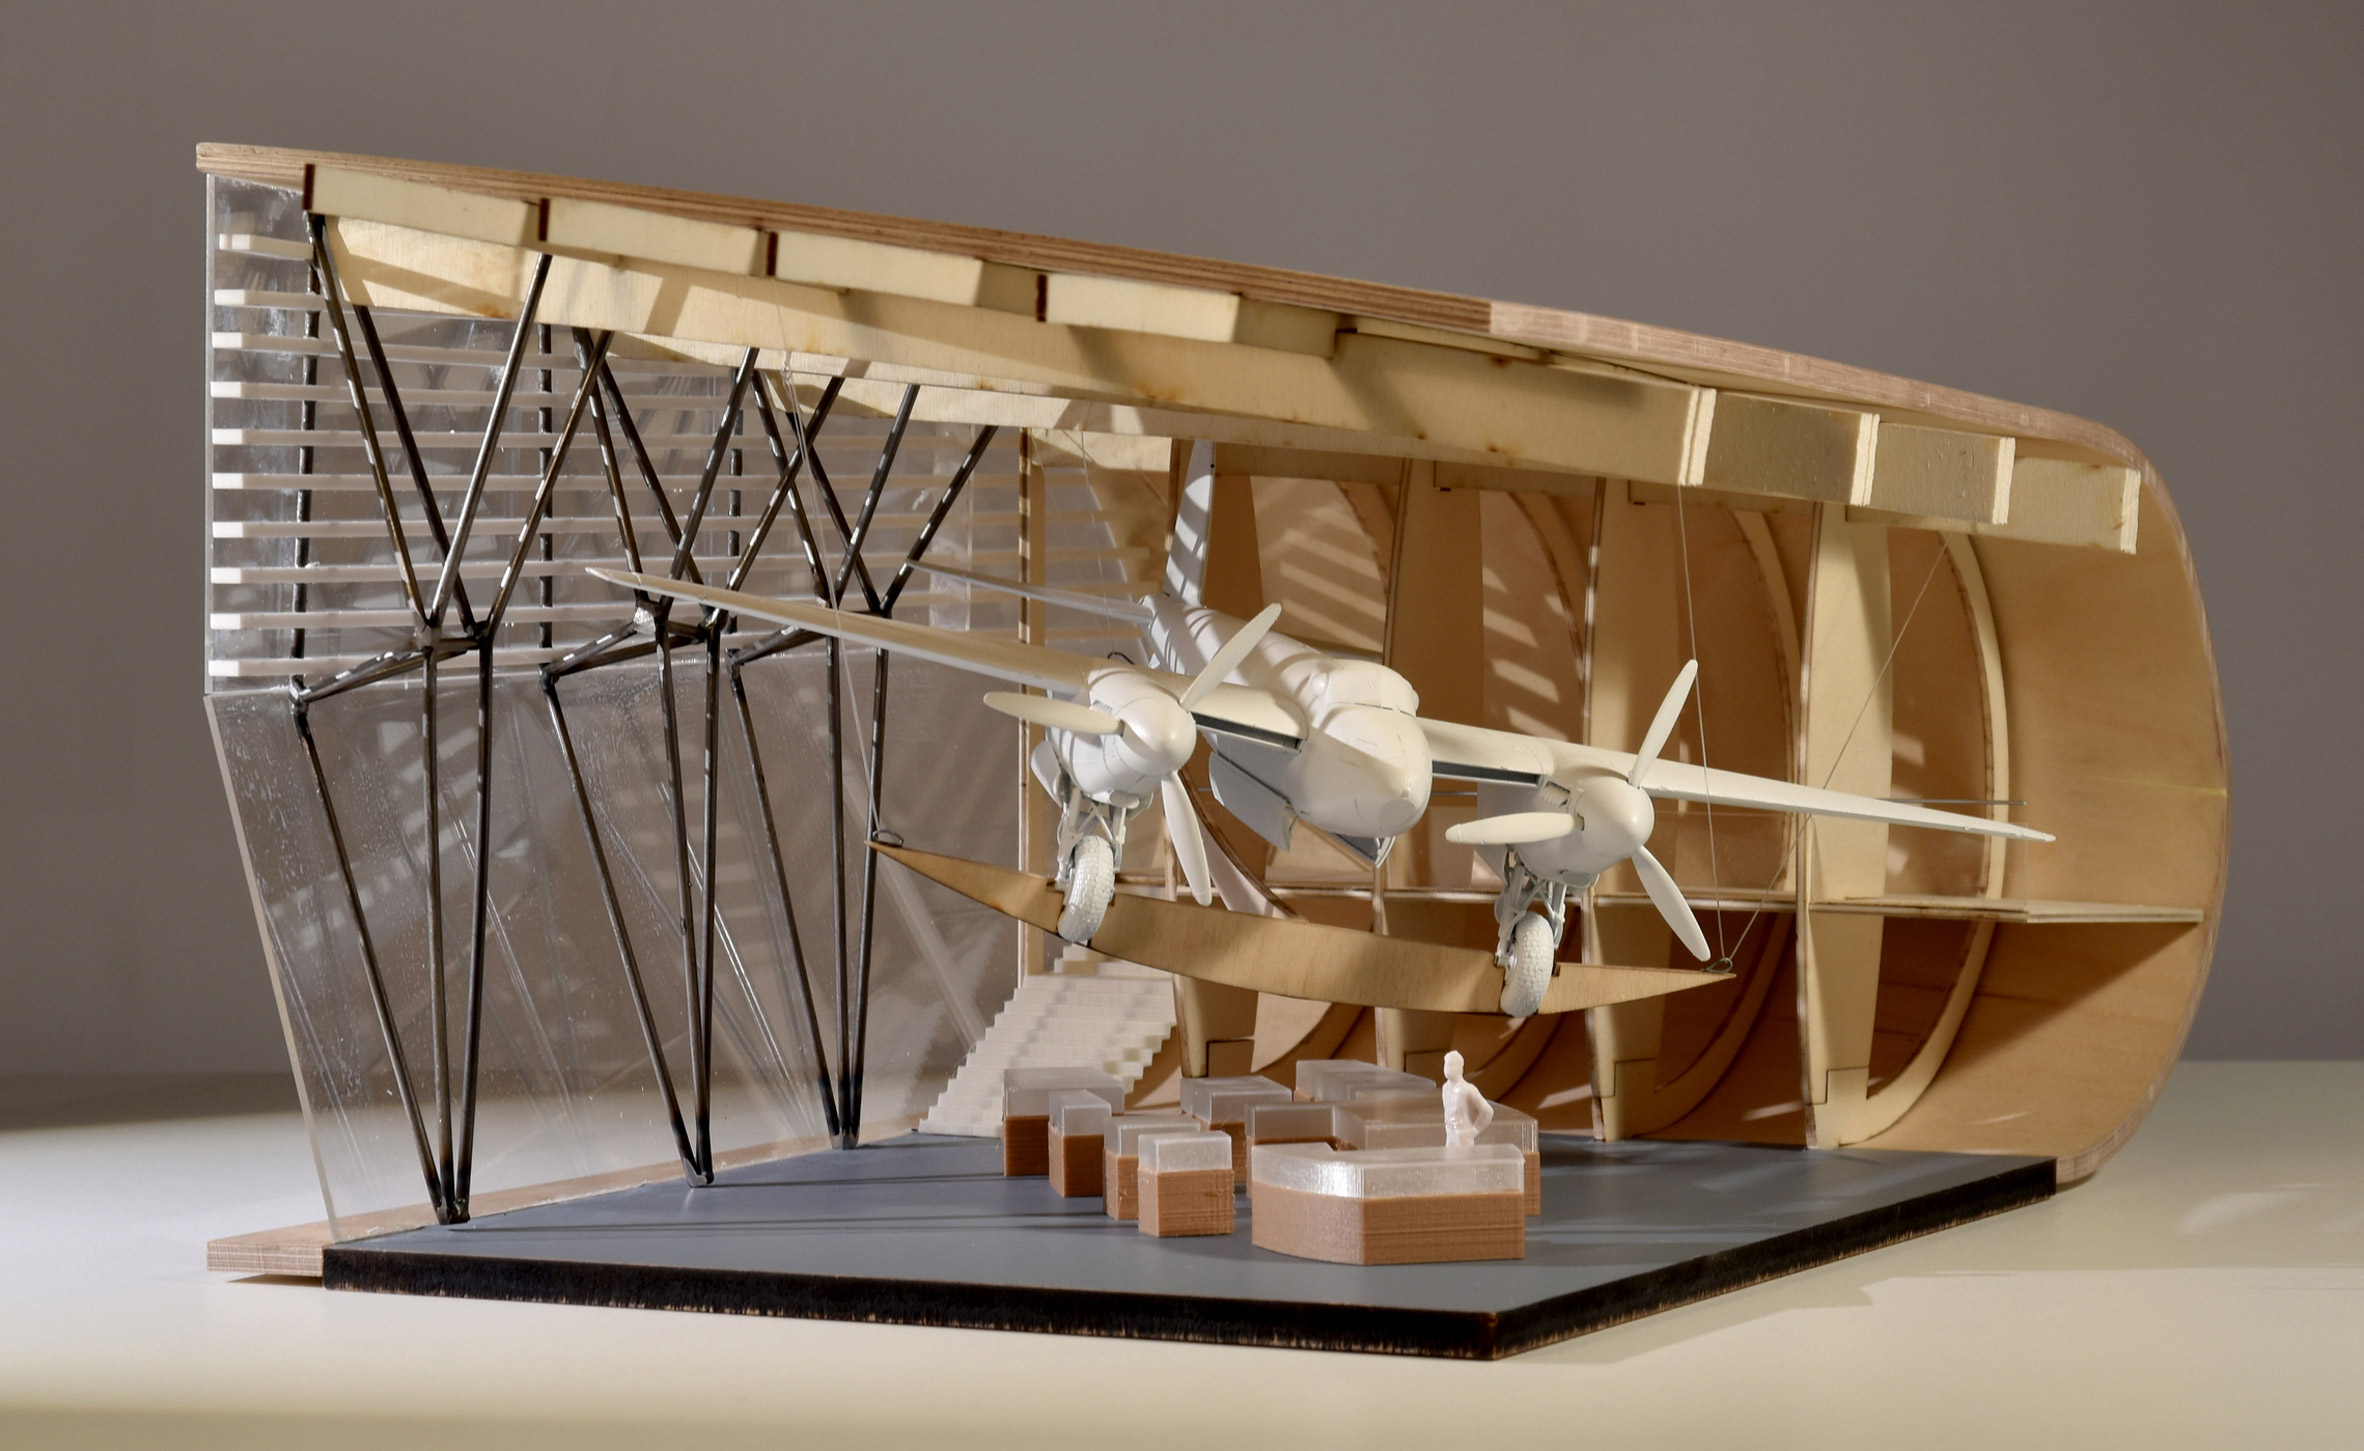 Sectional model showing airplane displayed in interior